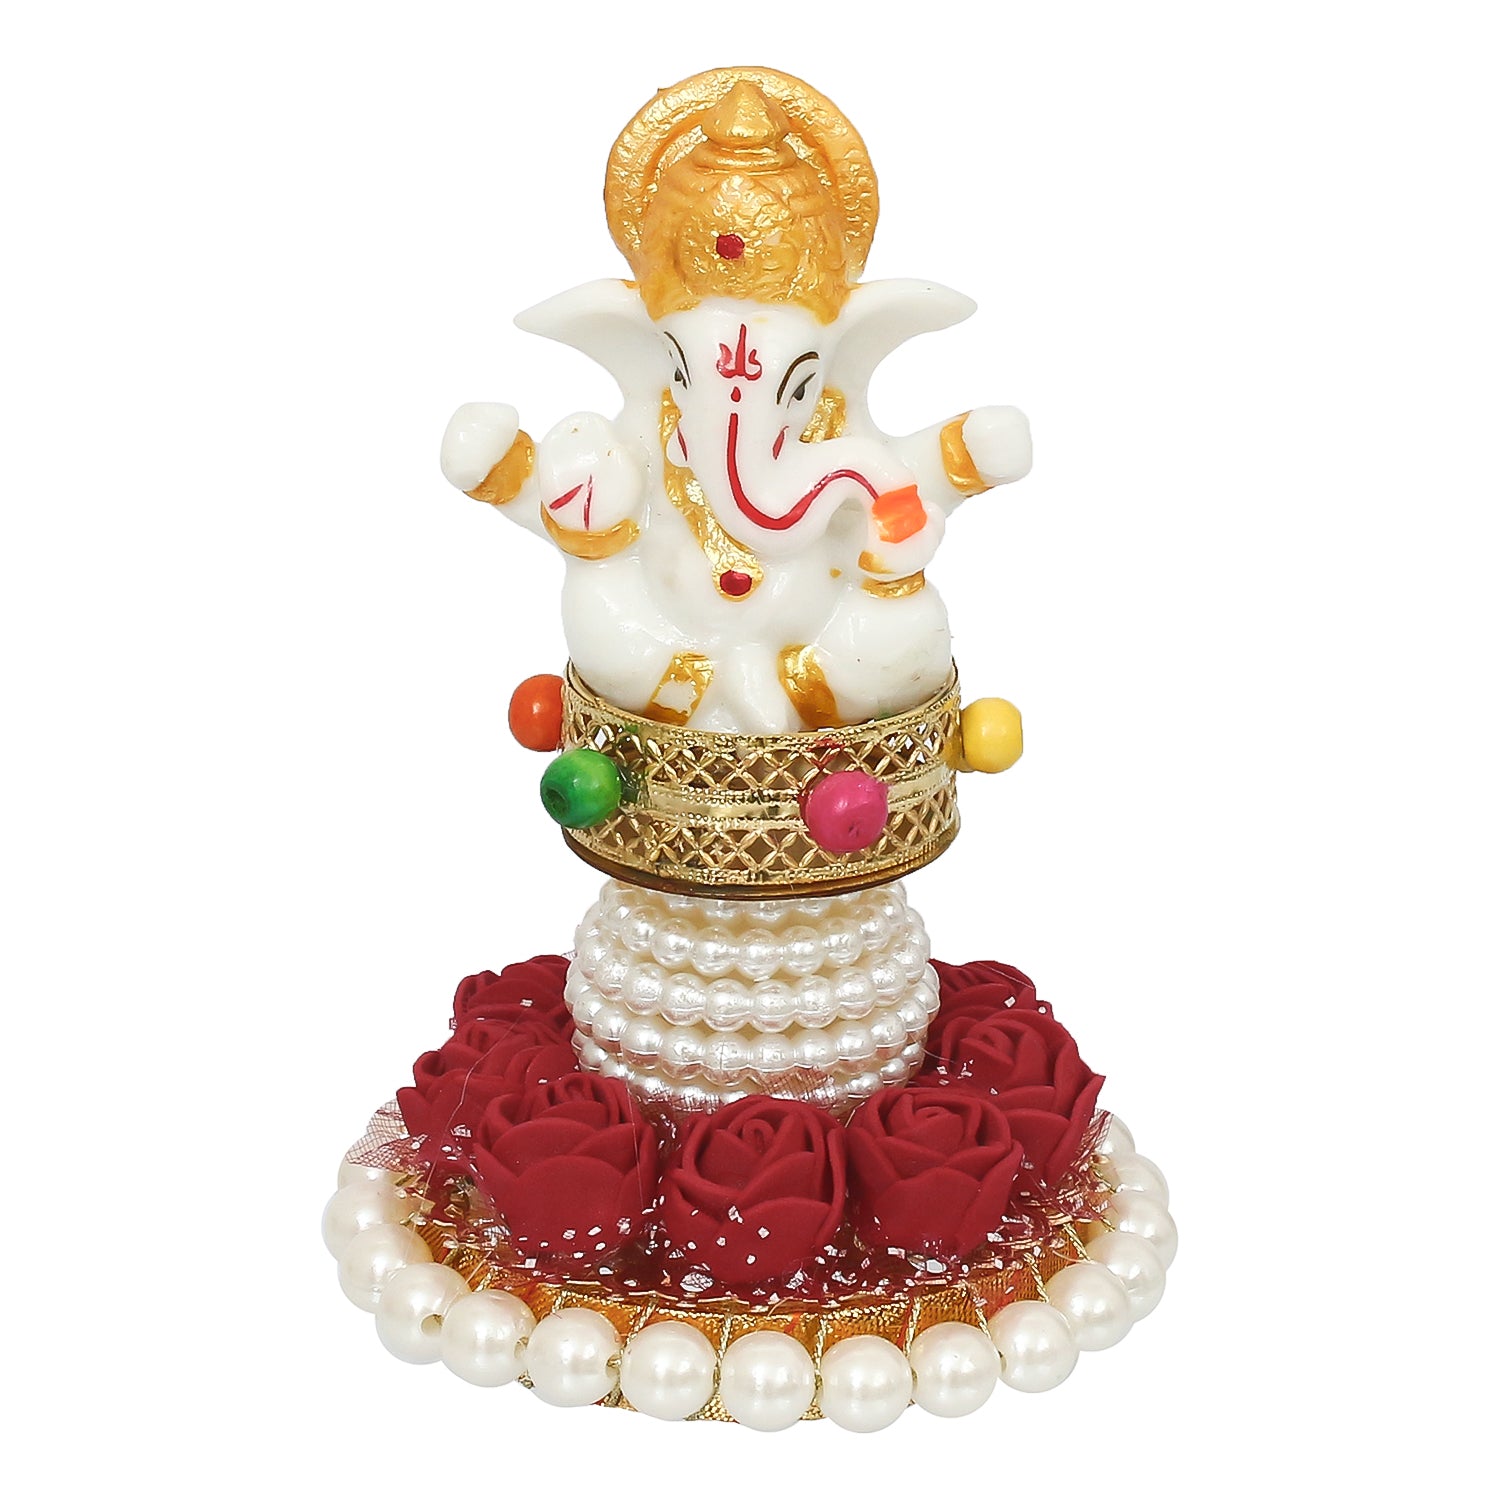 Polyresin Lord Ganesha Idol on Decorative Handcrafted Plate for Home, Office and Car Dashboard 1